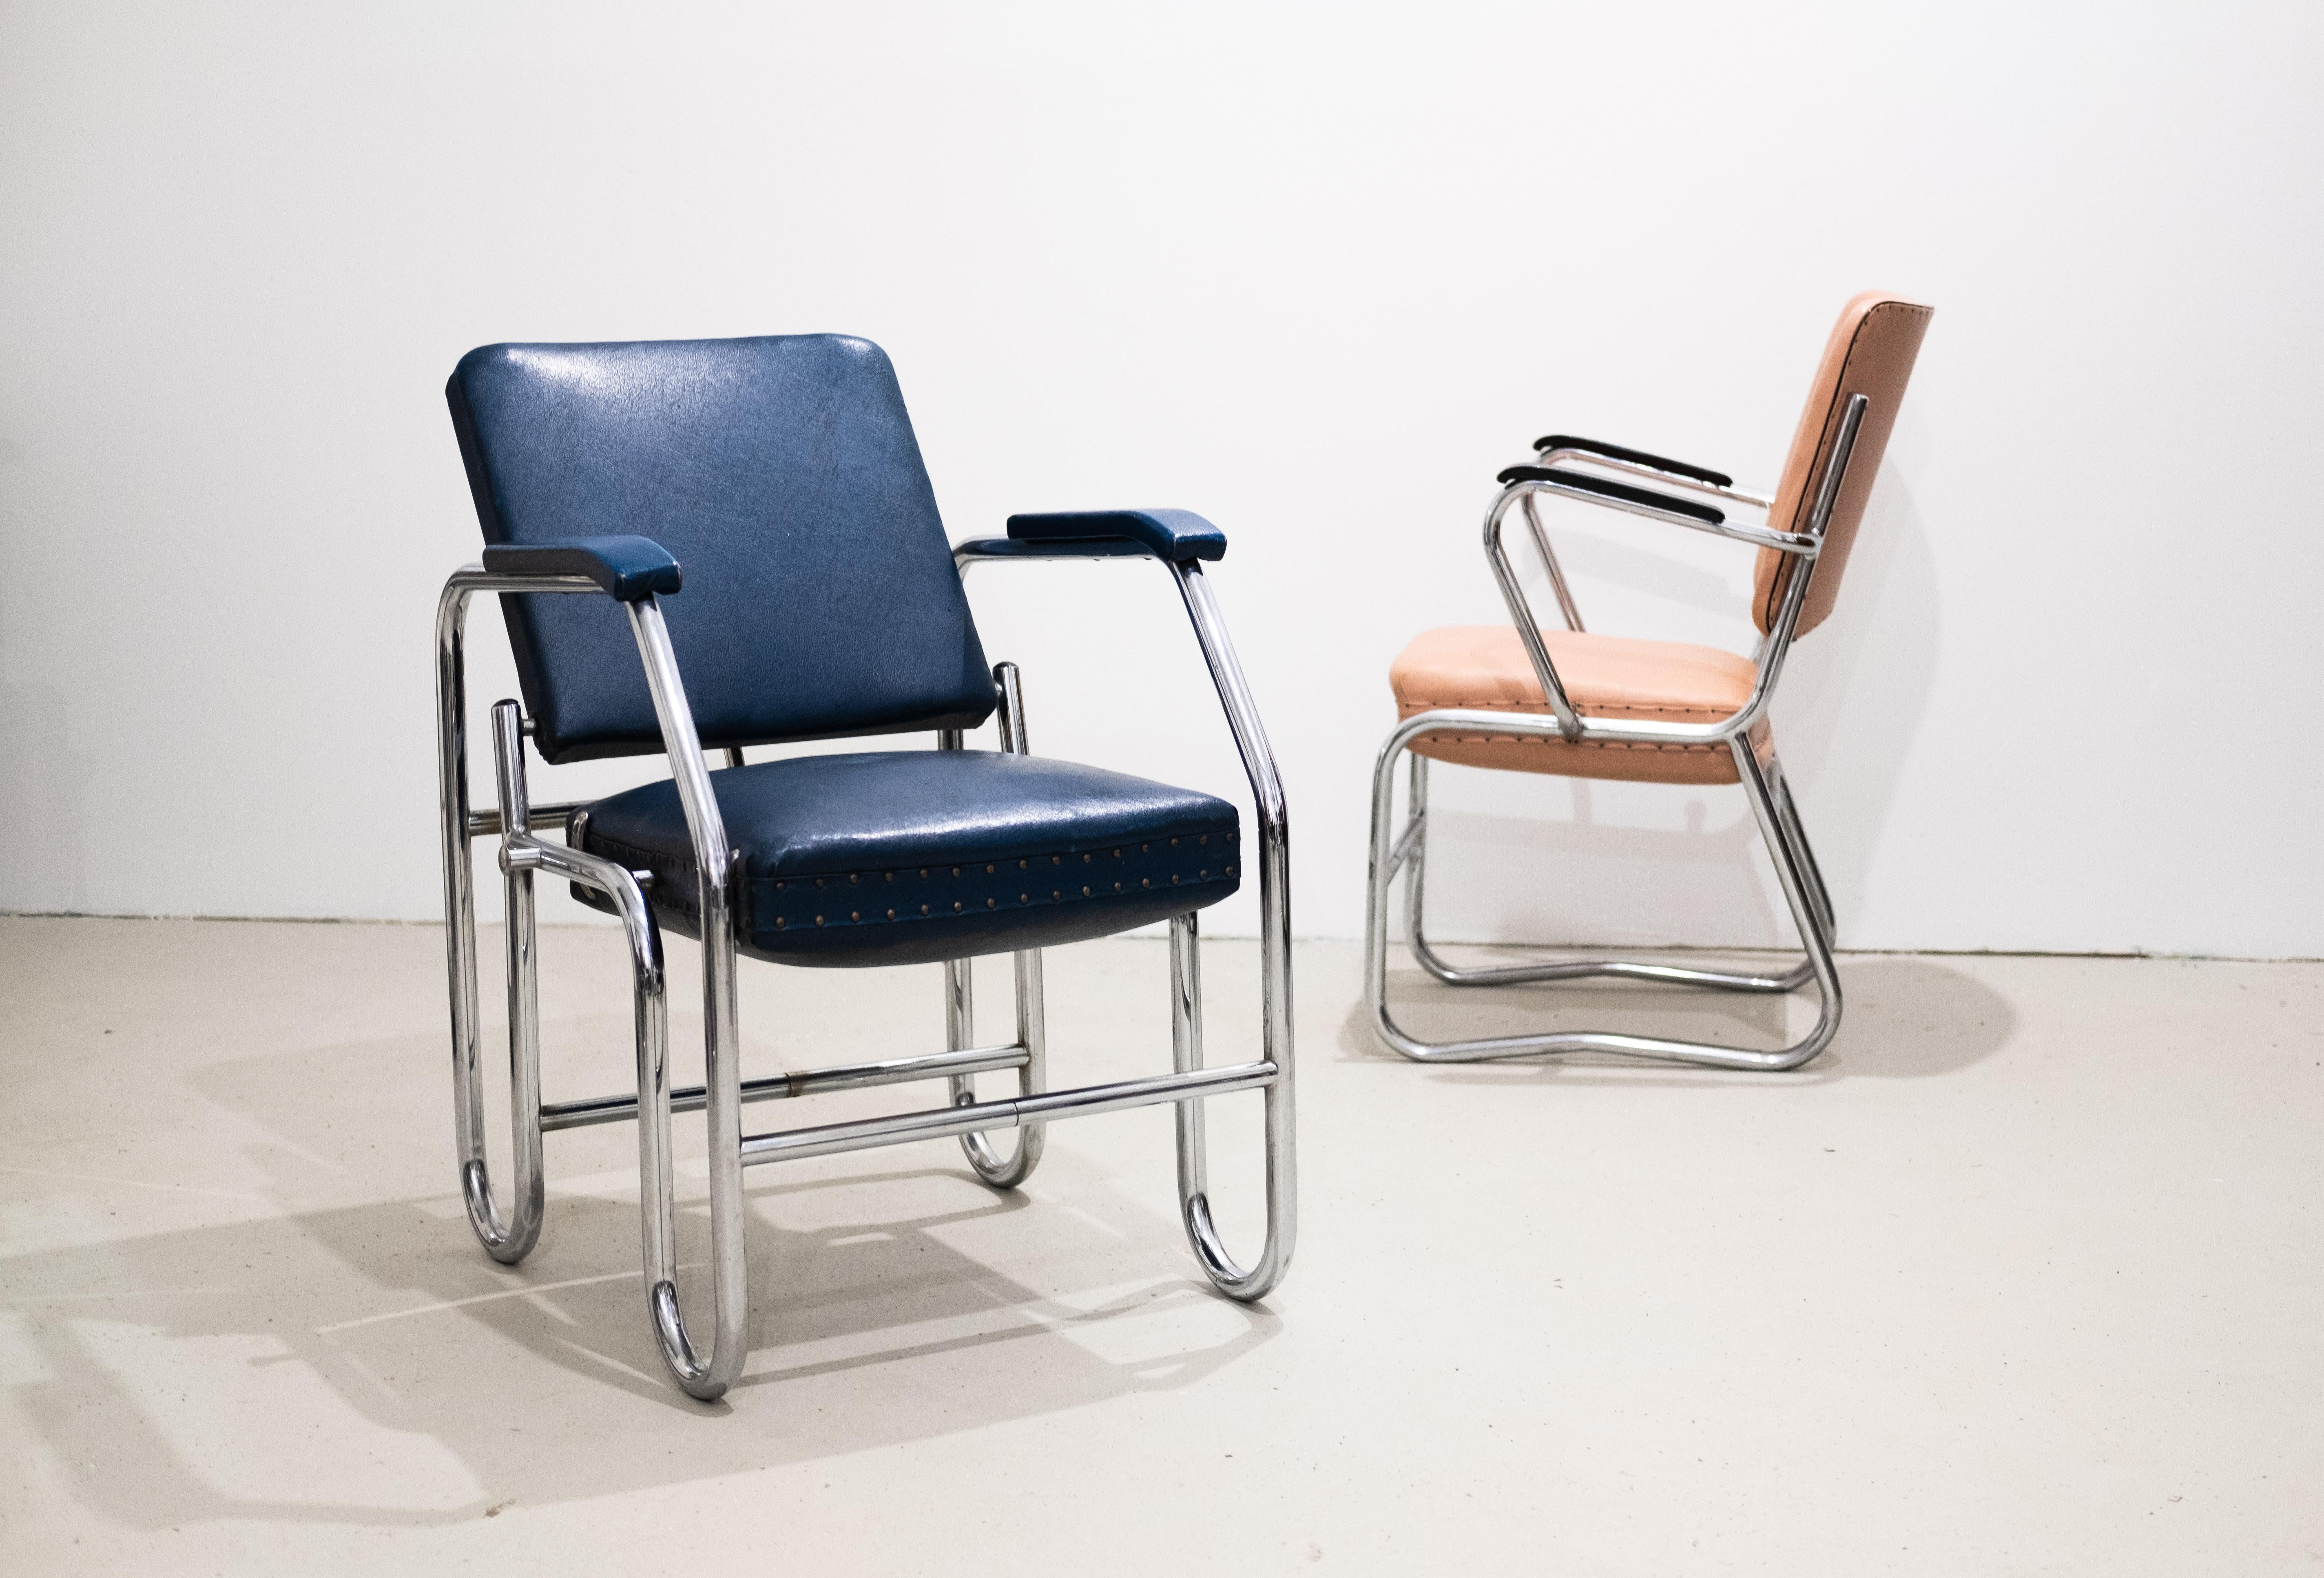 Blue Bauhaus Steelpipe Armchair with rotatable Seat (Amsterdam, 1930) For Sale 9